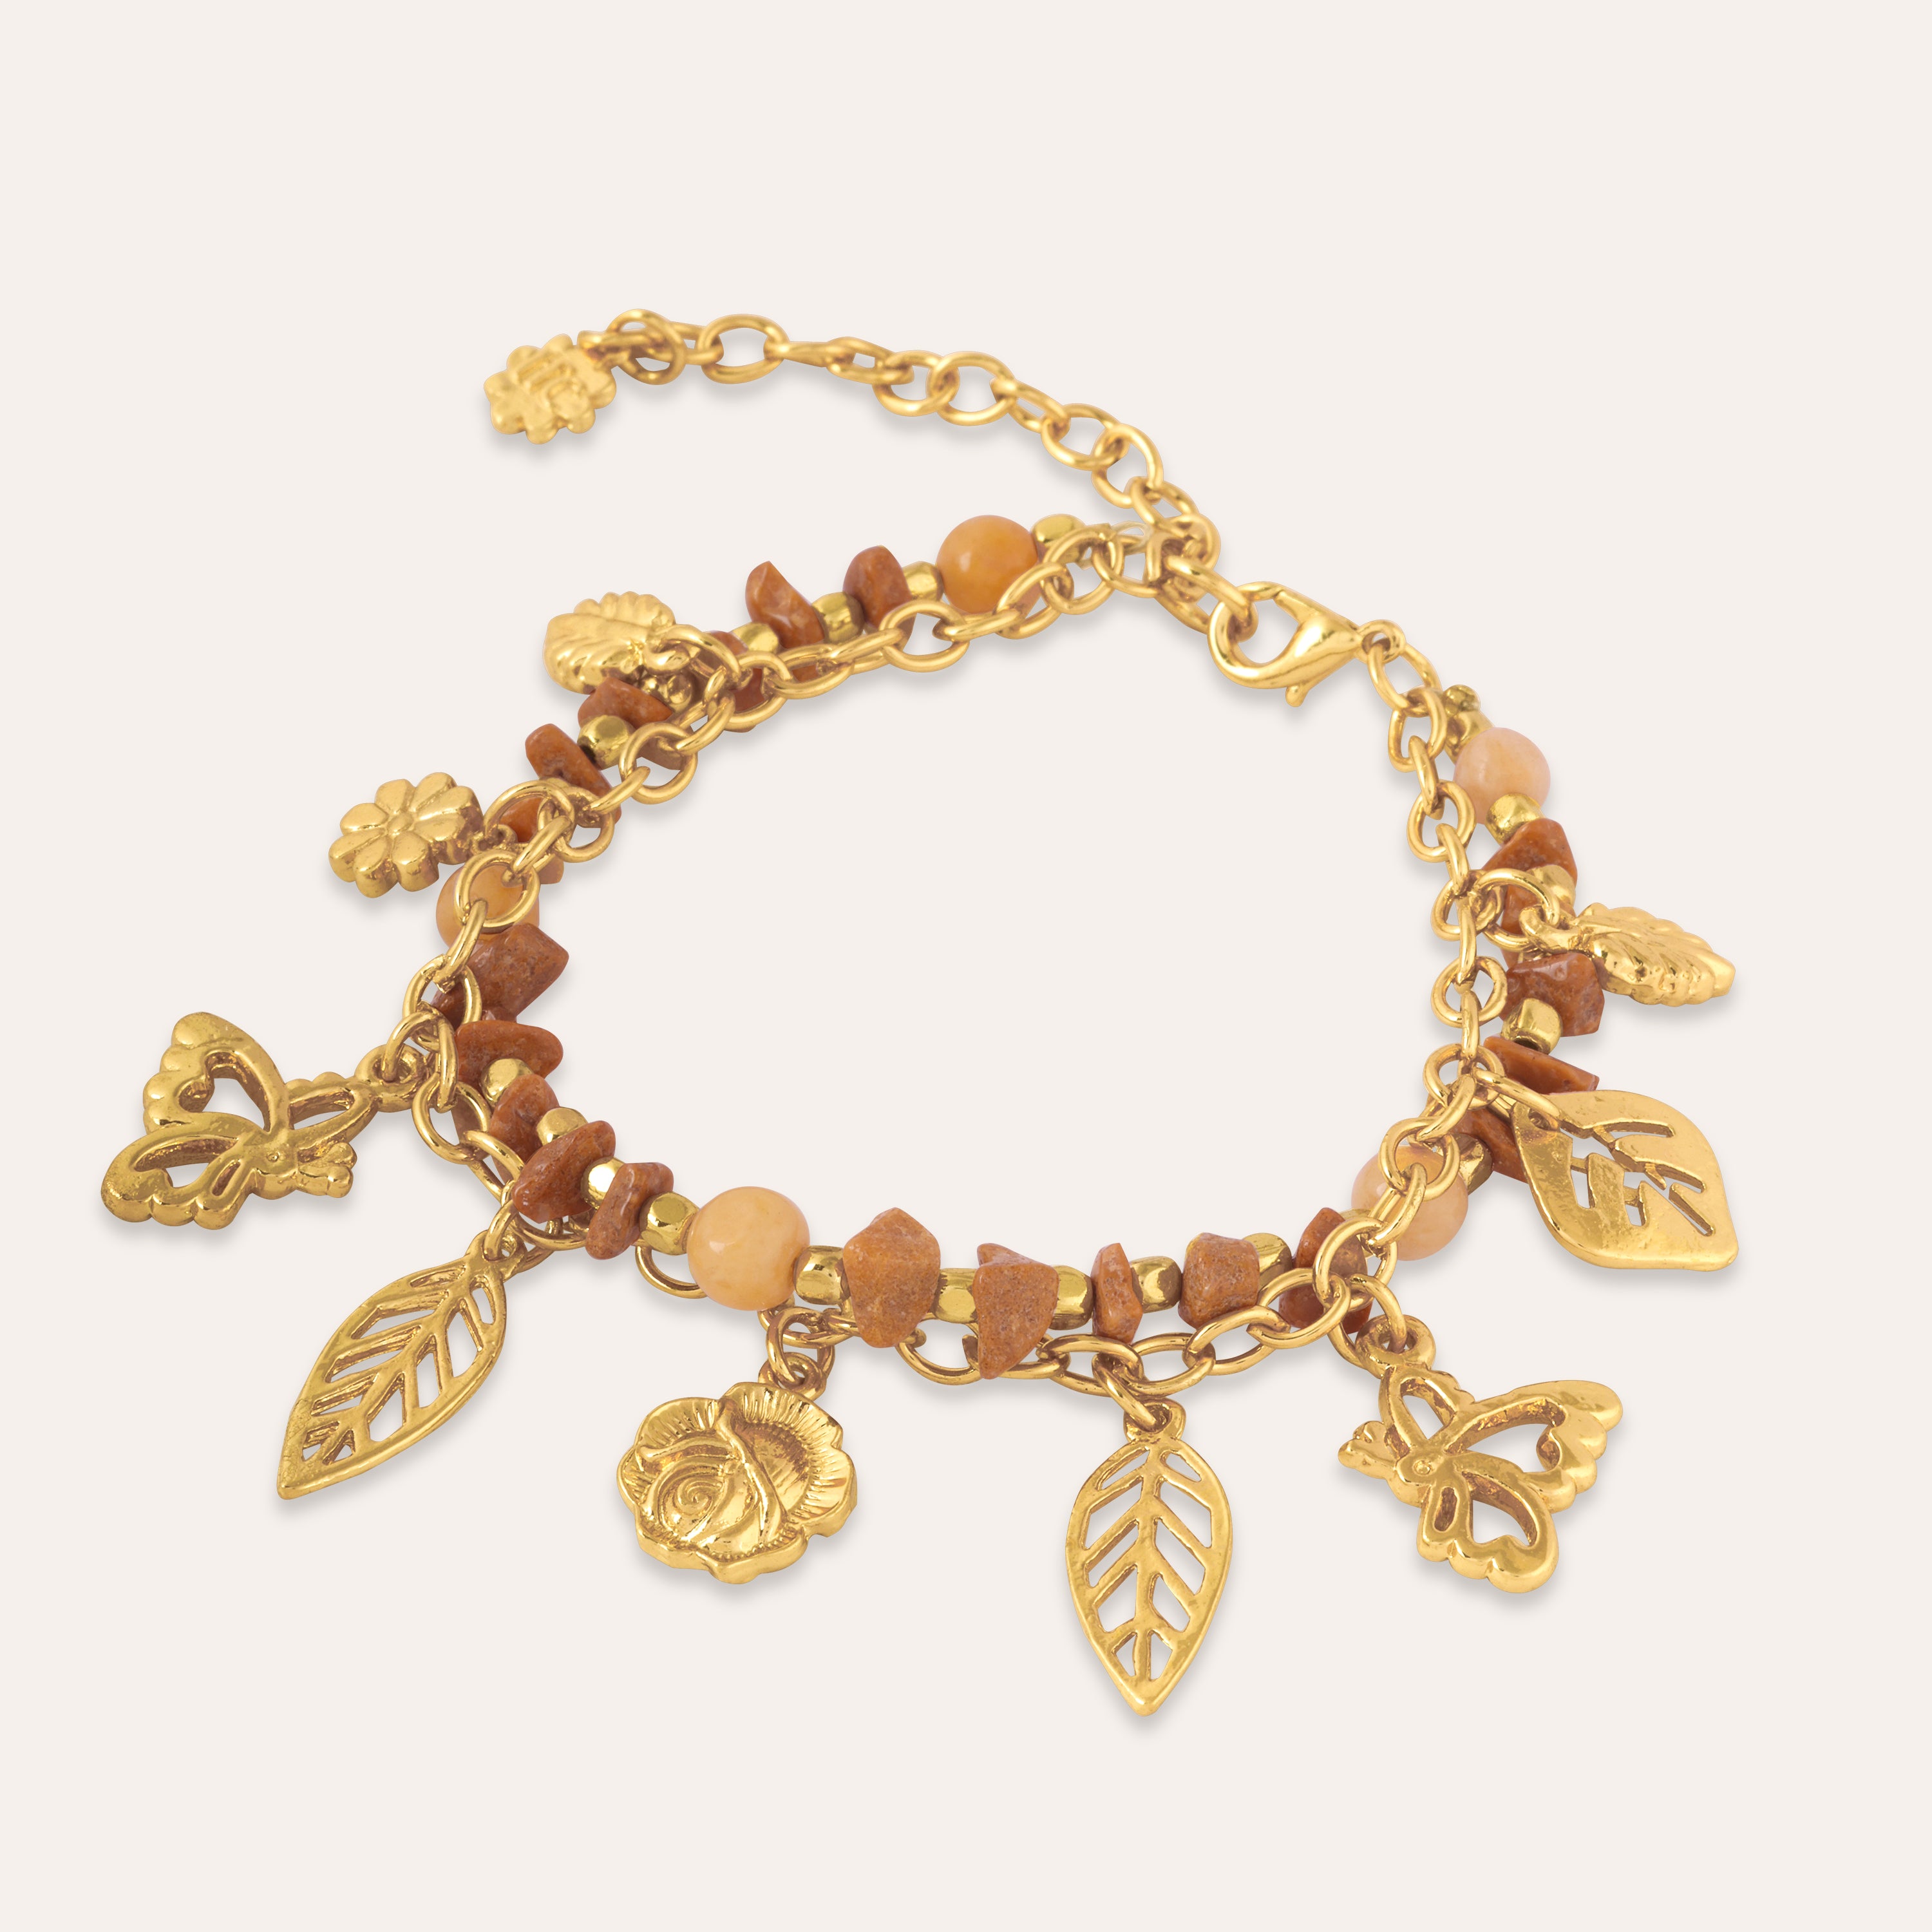 TFC Stones and Charms Gold Plated Bracelet Stack-Discover our stunning collection of stylish bracelets for women, featuring exquisite pearl bracelets, handcrafted beaded bracelets, and elegant gold-plated designs. Enjoy cheapest anti-tarnish fashion jewellery and long-lasting brilliance only at The Fun Company.